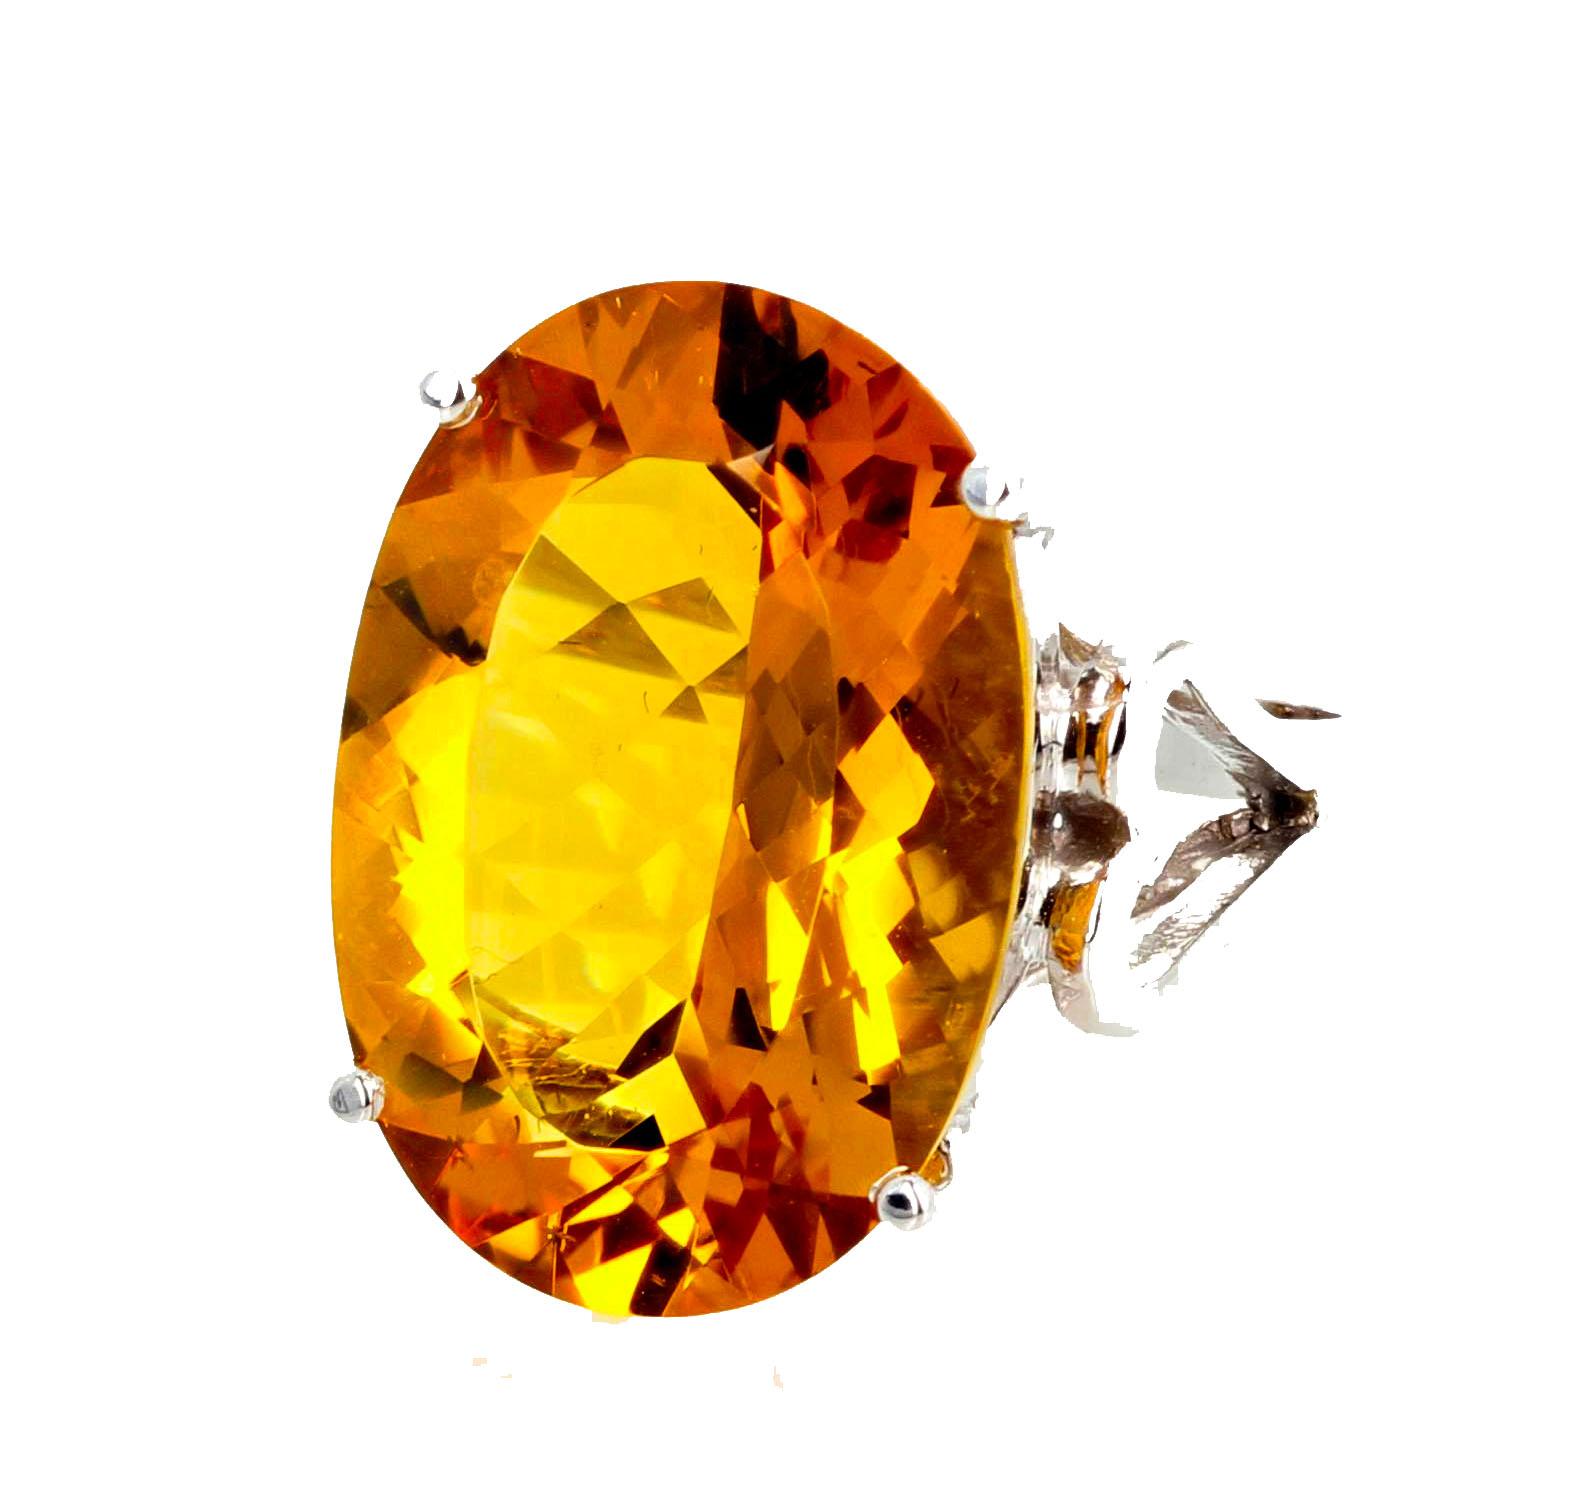 This Movie Star collection ring is a red carpet show stopper.  This is a large oval 14.5Ct Goldy Yellow Citrine solitaire.  This gemstone is 20mm x 14mm x 5.5mm deep and has no apparent eye visible inclusions.  You will feel like the queen of the